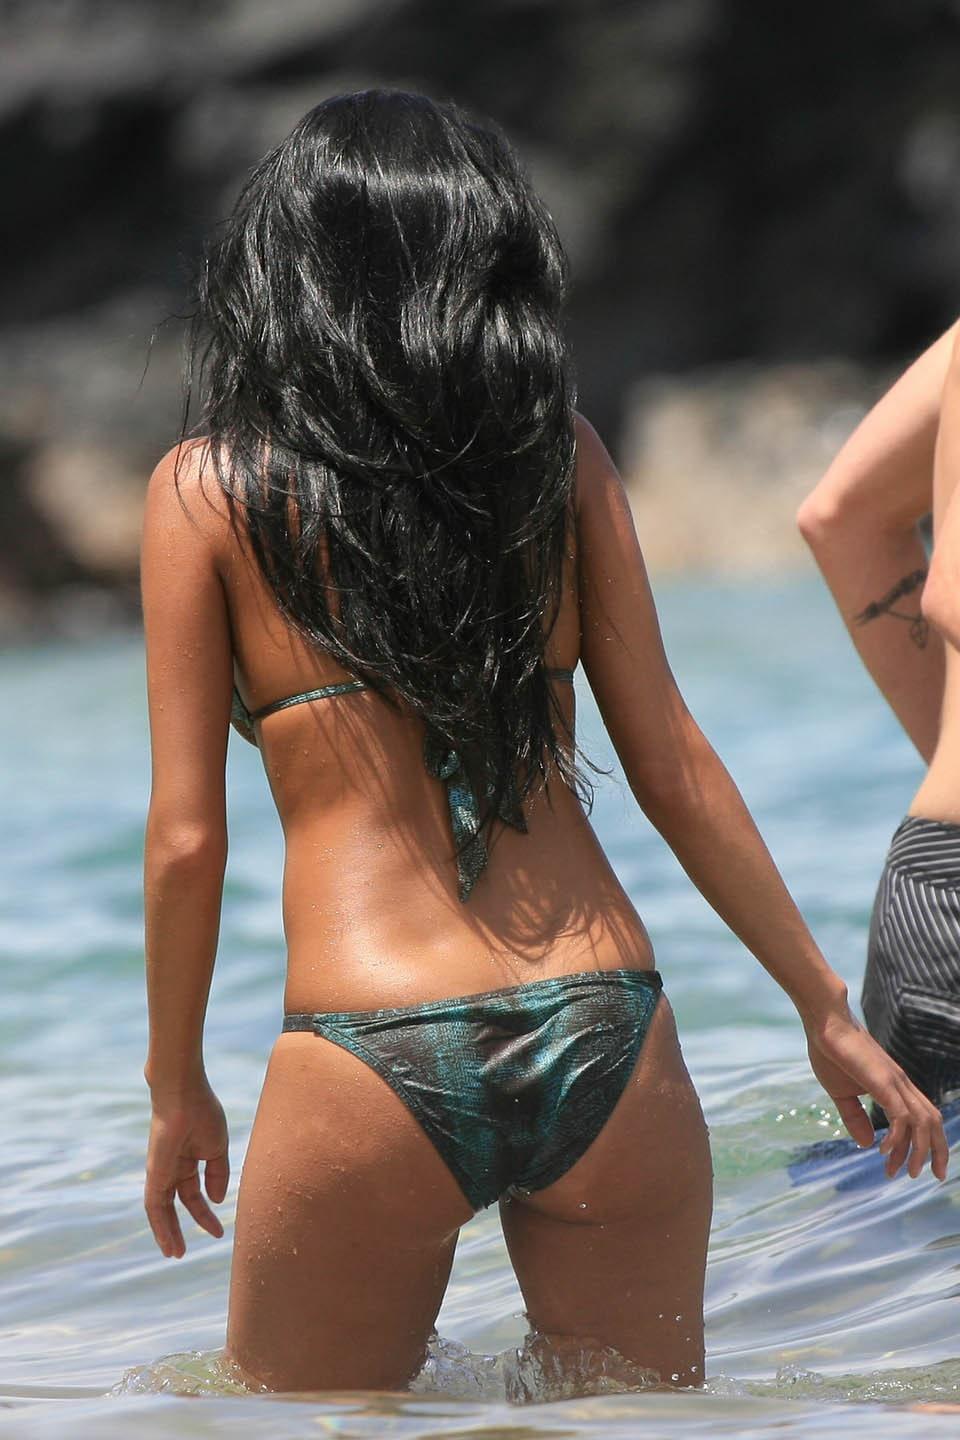 61 Hottest Nicole Scherzinger Ass Pictures That Prove That She Is A Very Hot Woman | Best Of Comic Books